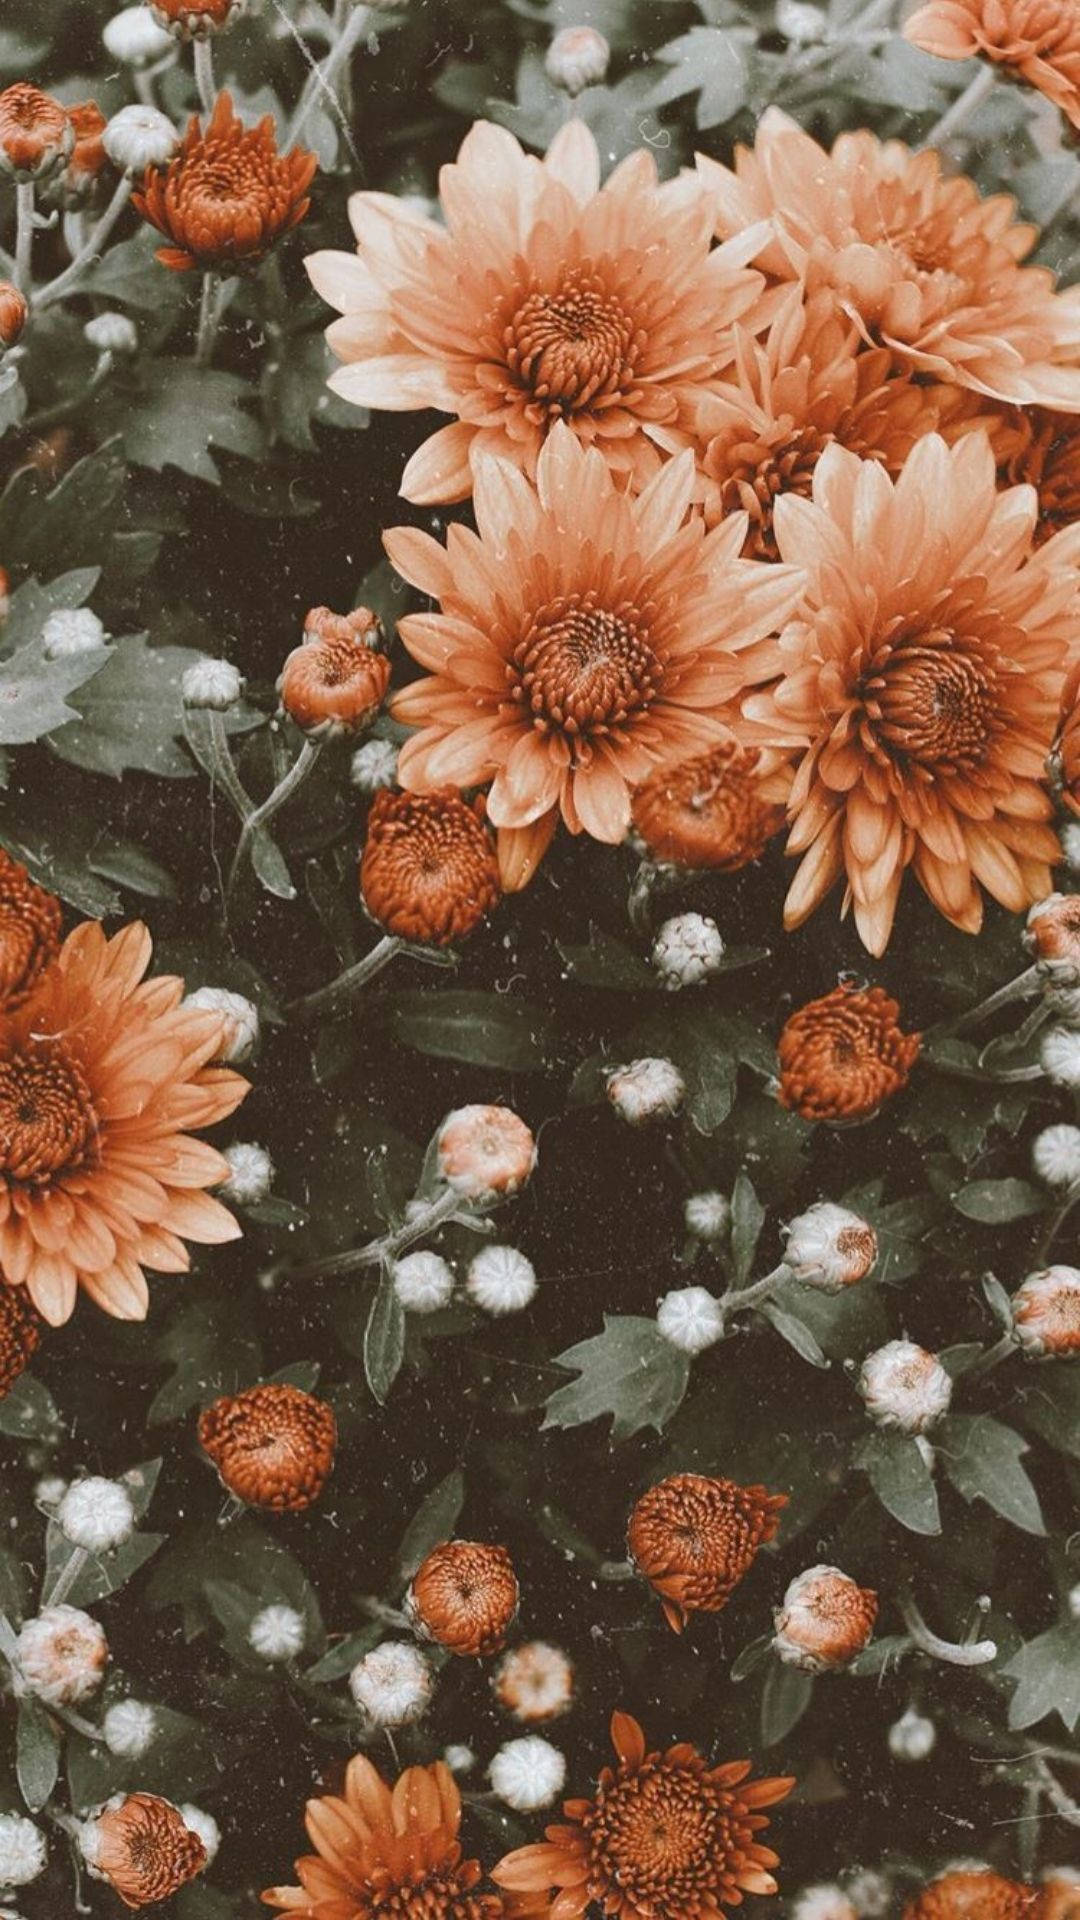 Flower Aesthetic 1080X1920 Wallpaper and Background Image